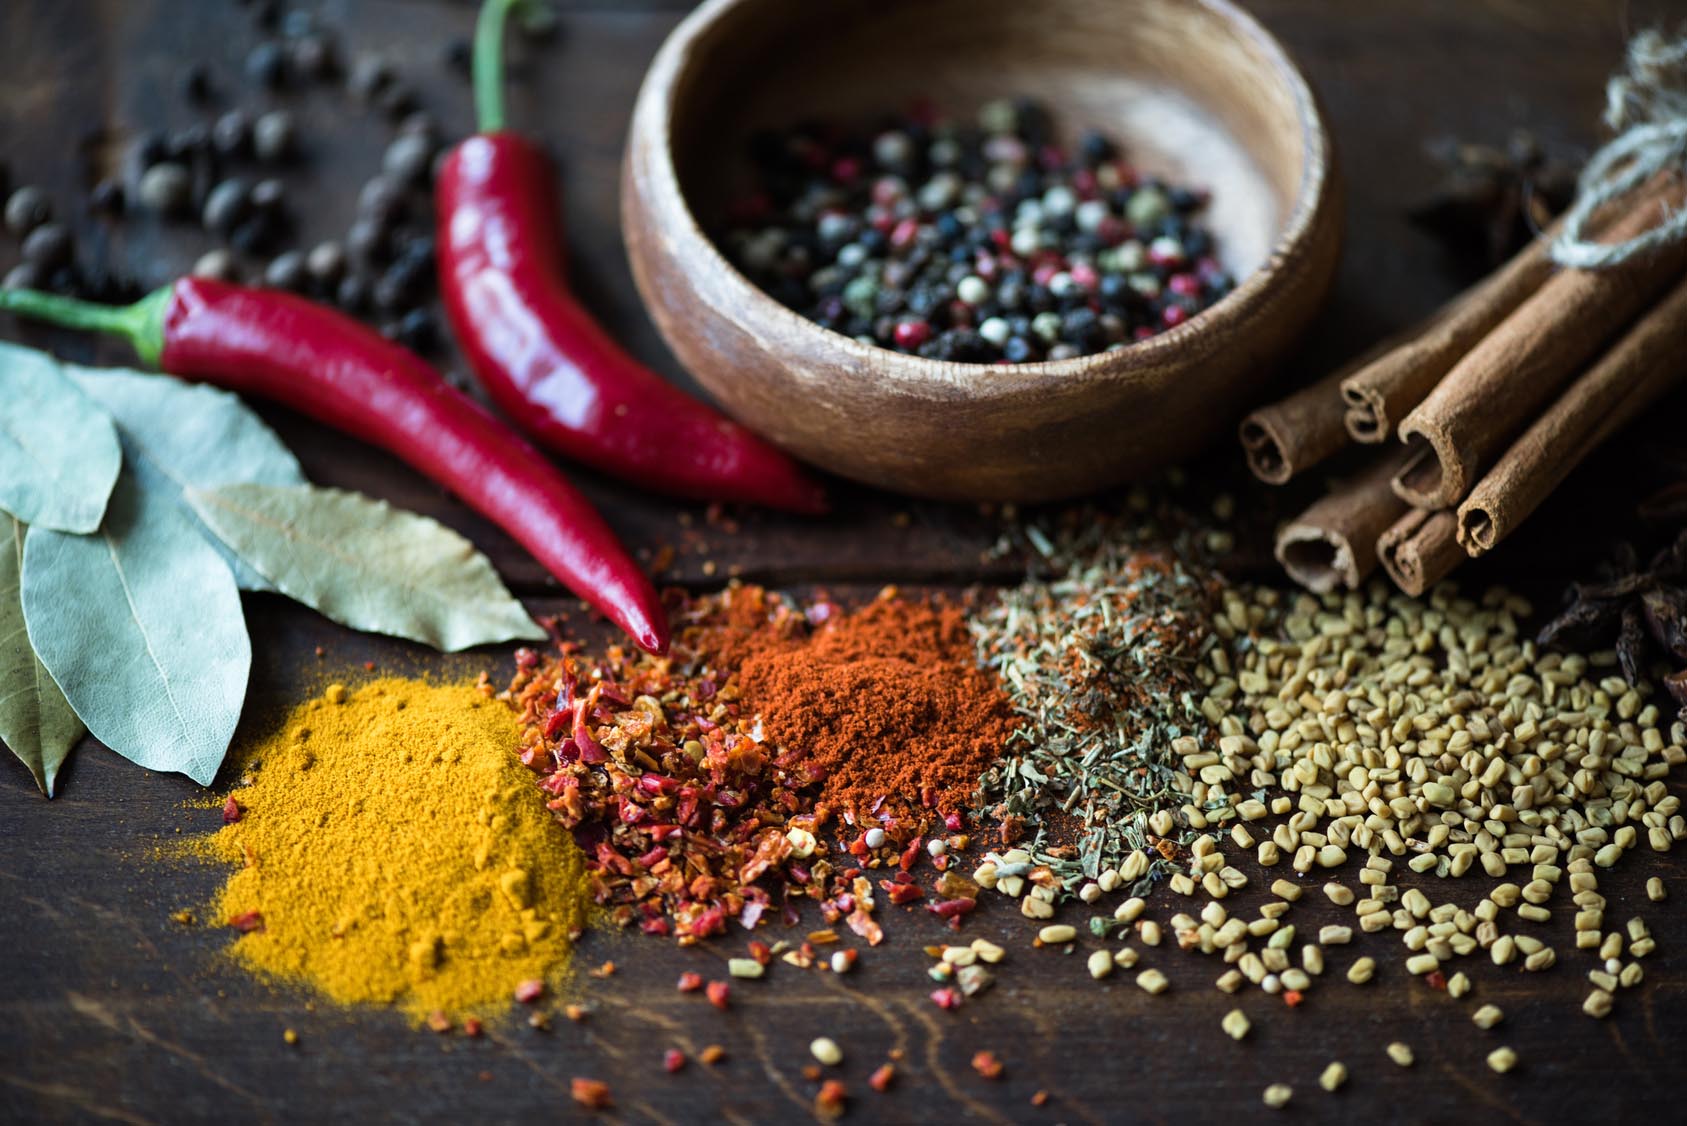 About - Gourmet Spice Company - Wholesale Food Distributor